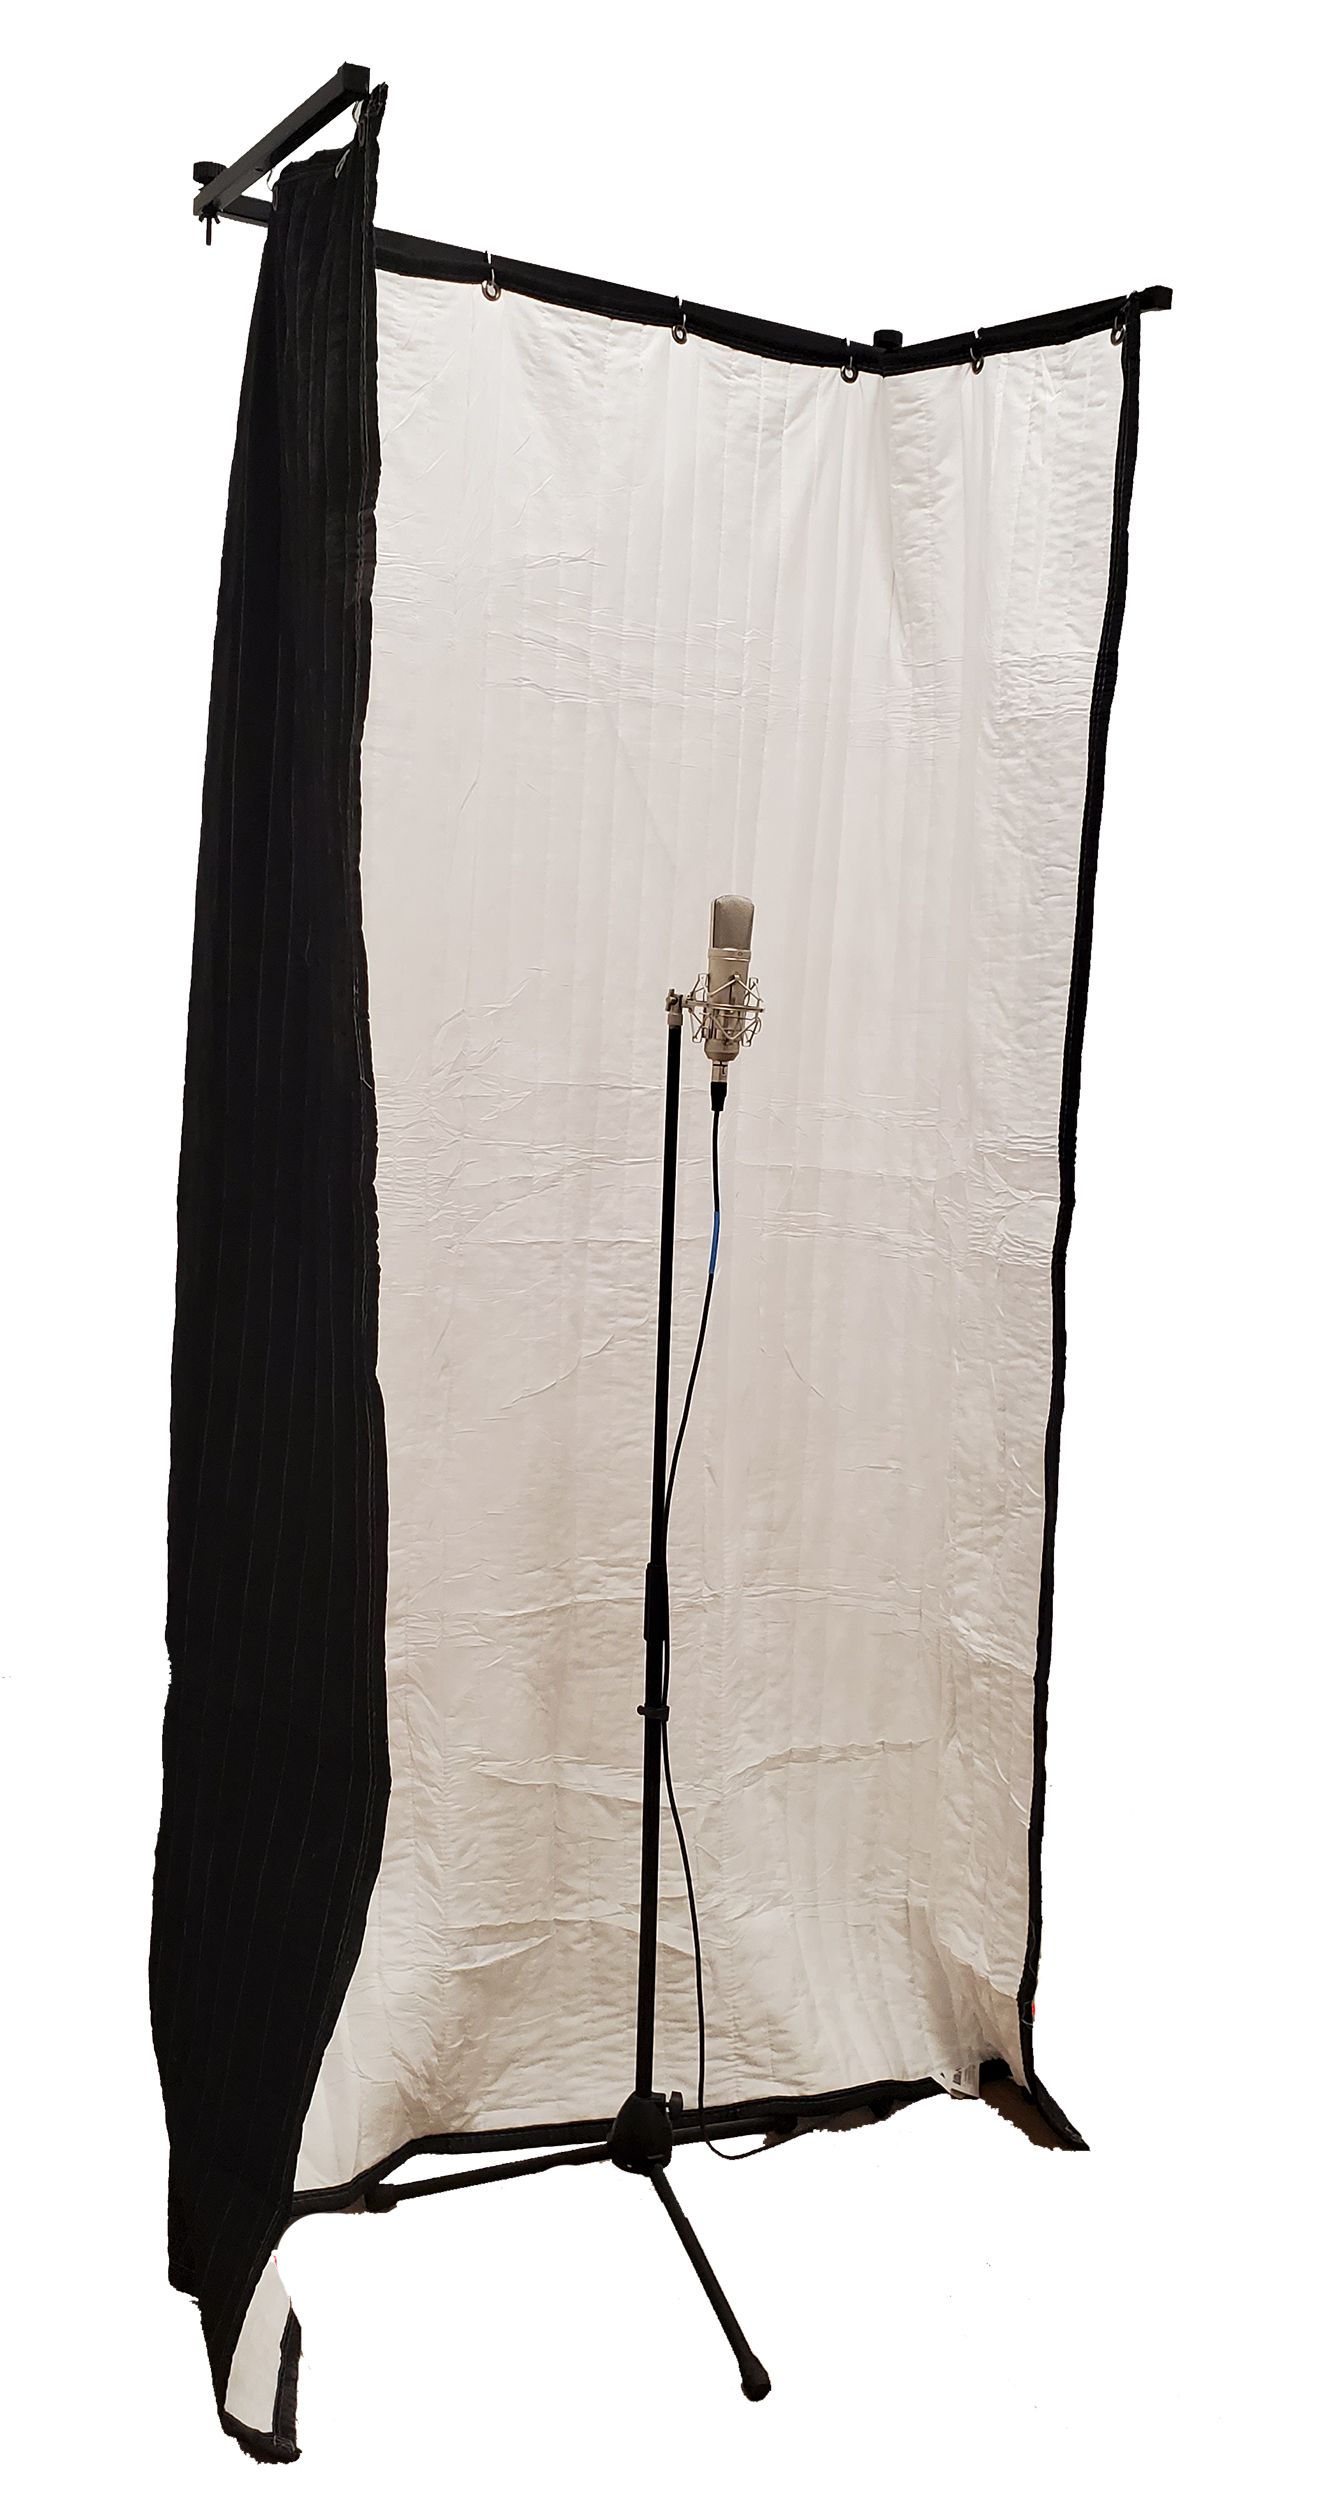 FlexTee Stand for acoustic room treatment with Microphone side